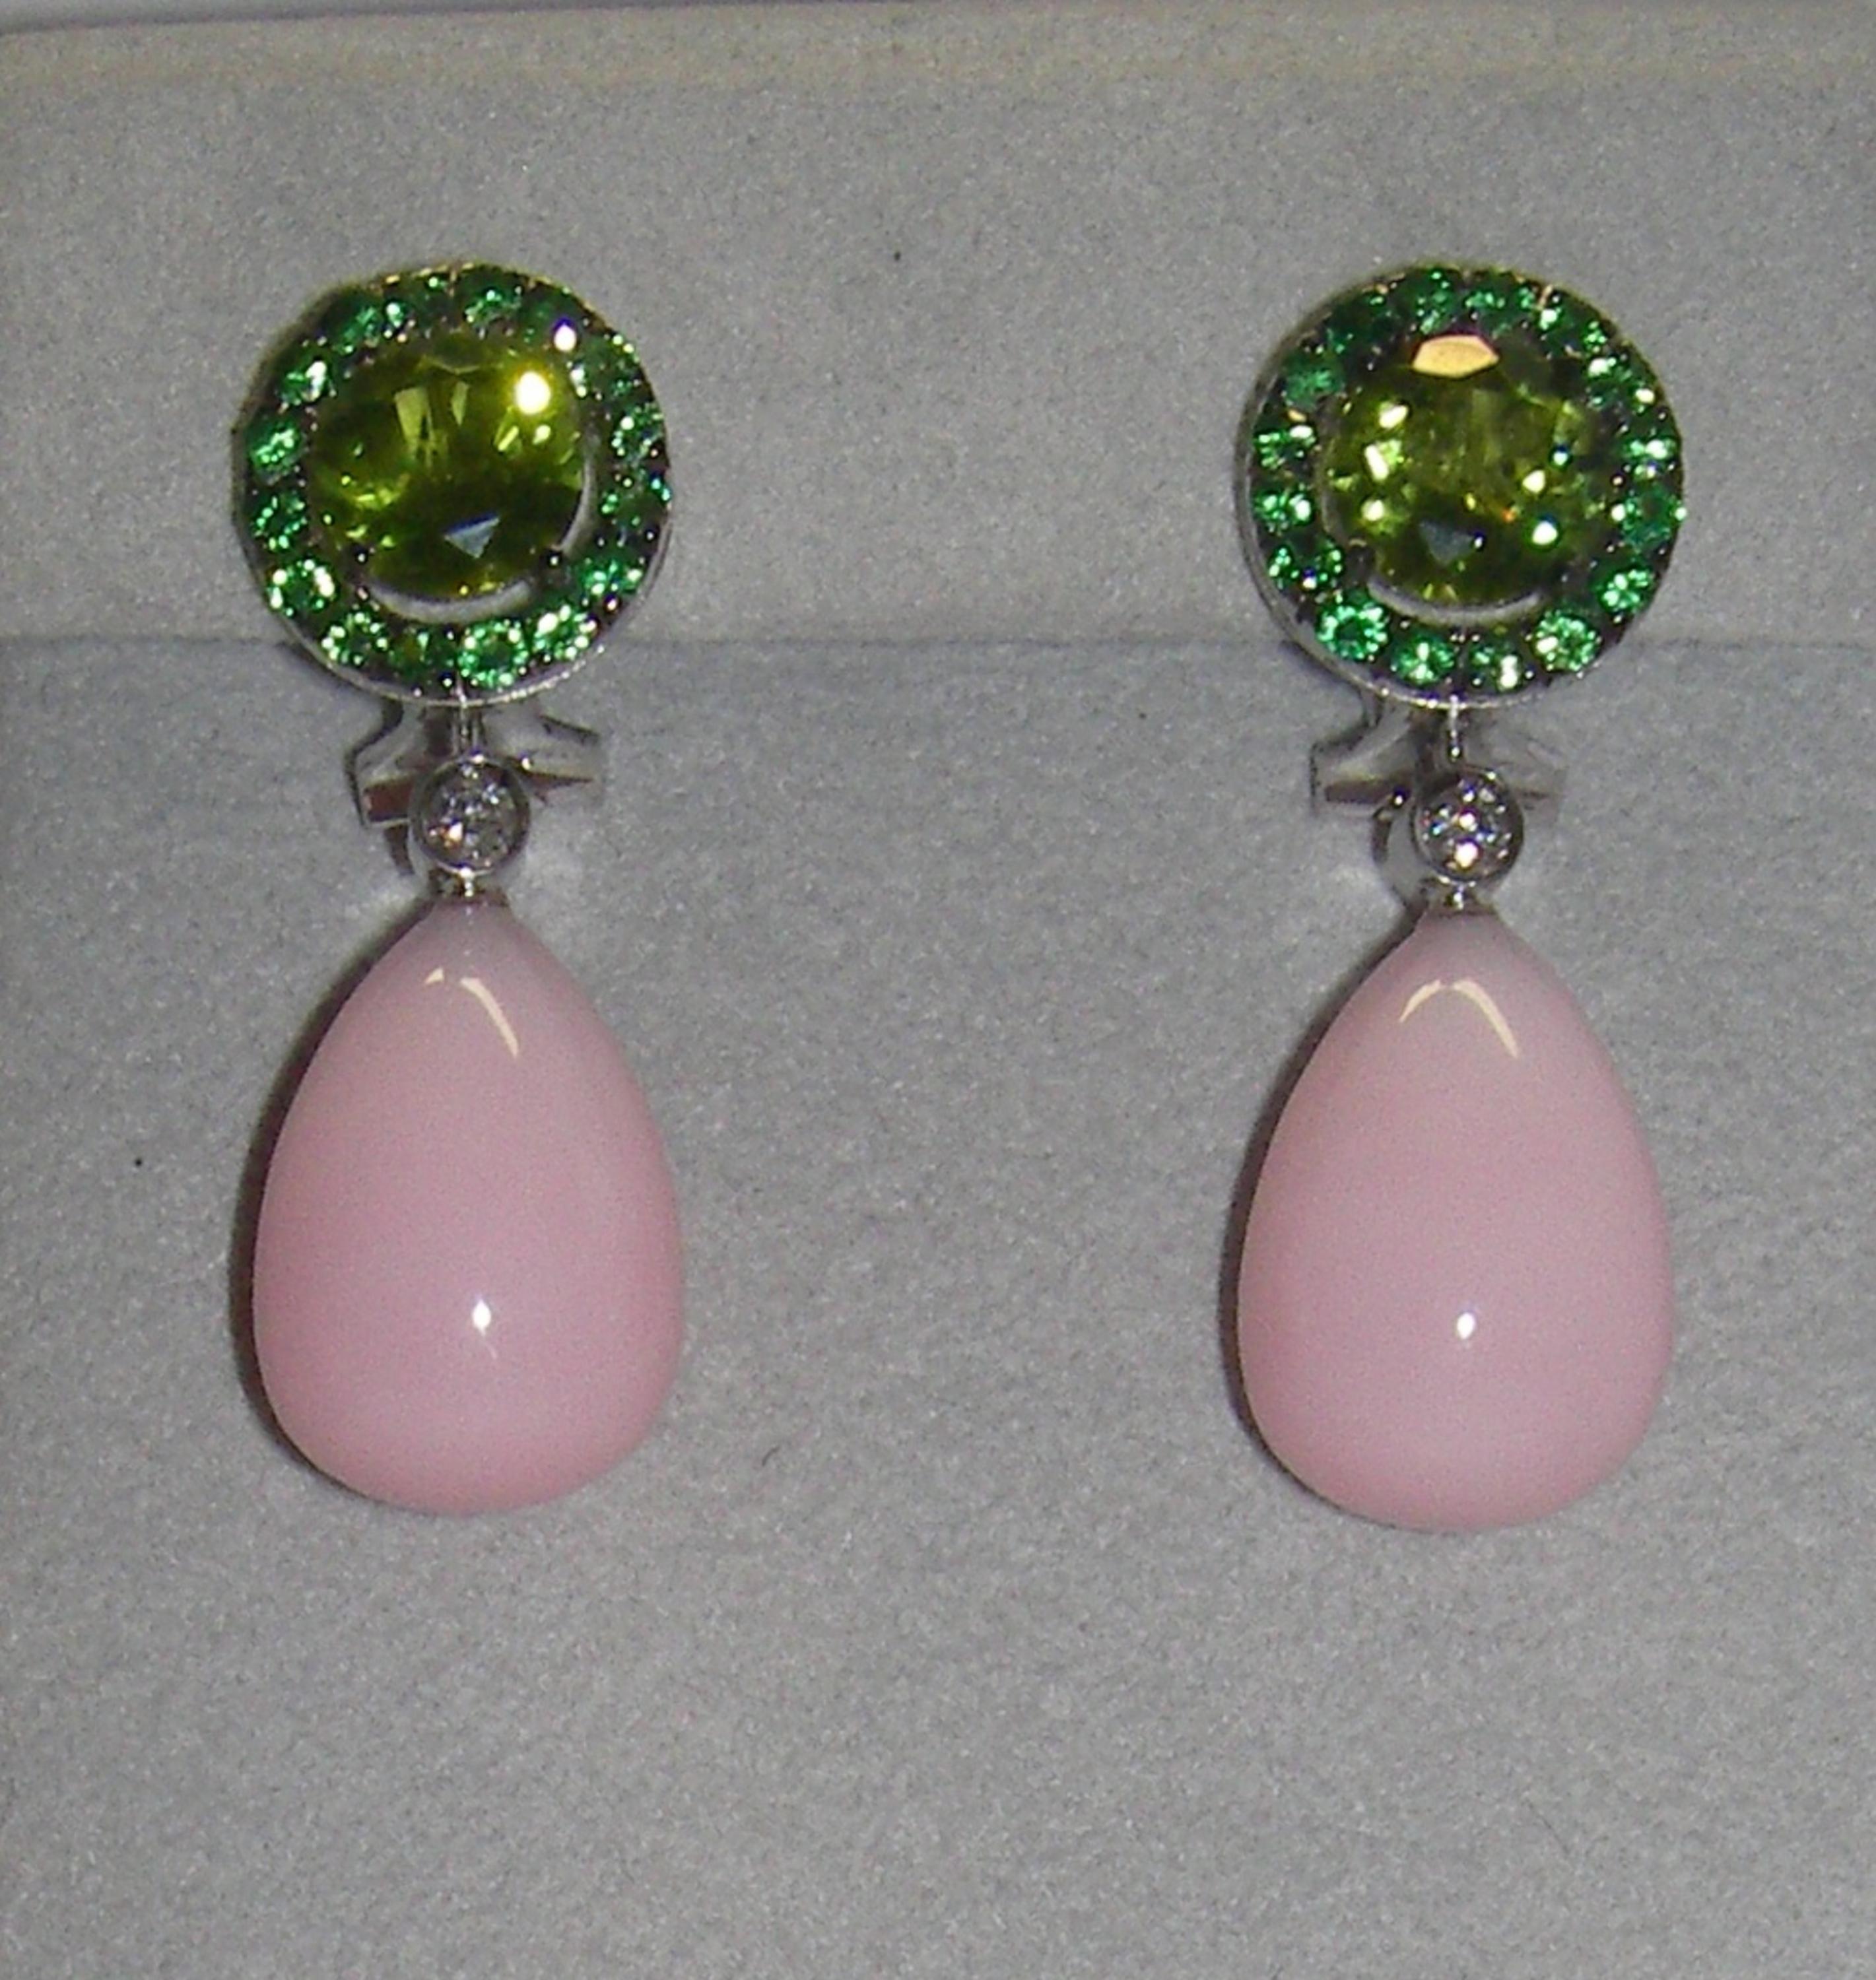 A beautiful set of dangle earrings with a round cut peridot centerpiece at the base, and a tsavorite halo. The base is followed by a single diamond stone and a pear-shape cabochon rose opal. 